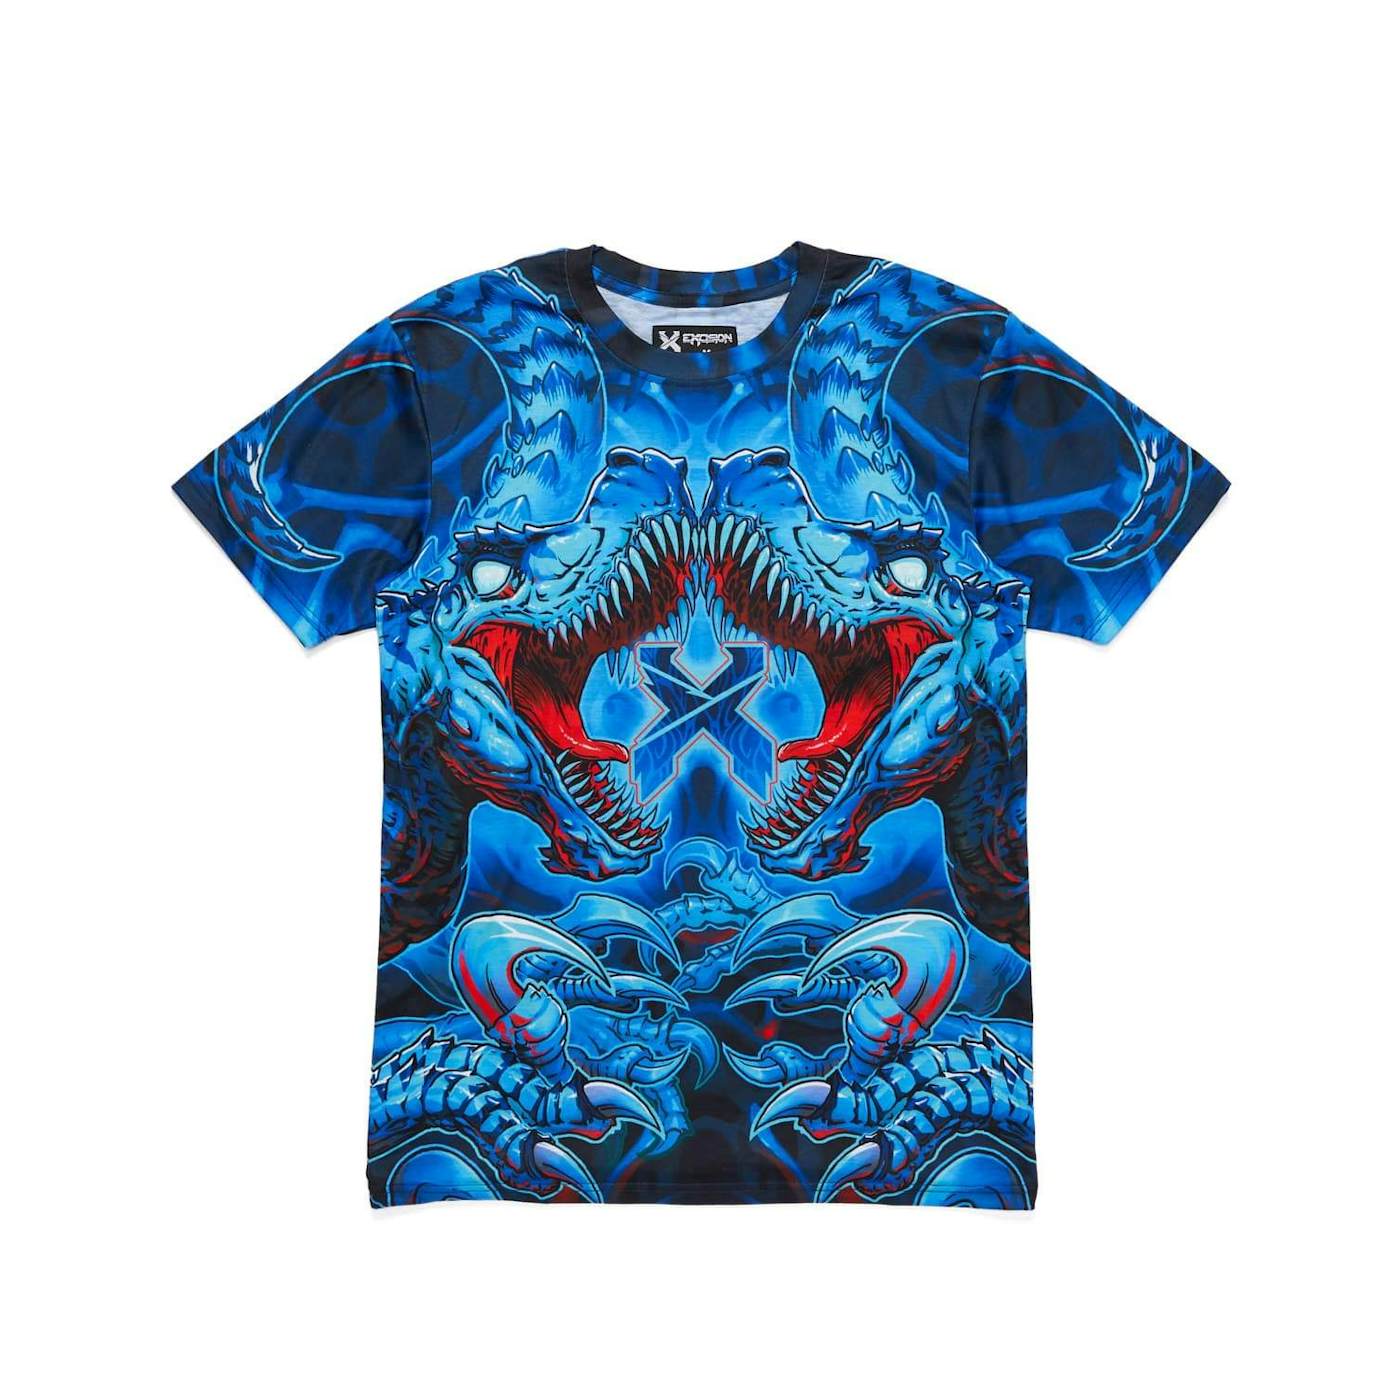 Excision 'Raptor Attack' Dye Sub Tee - Blue